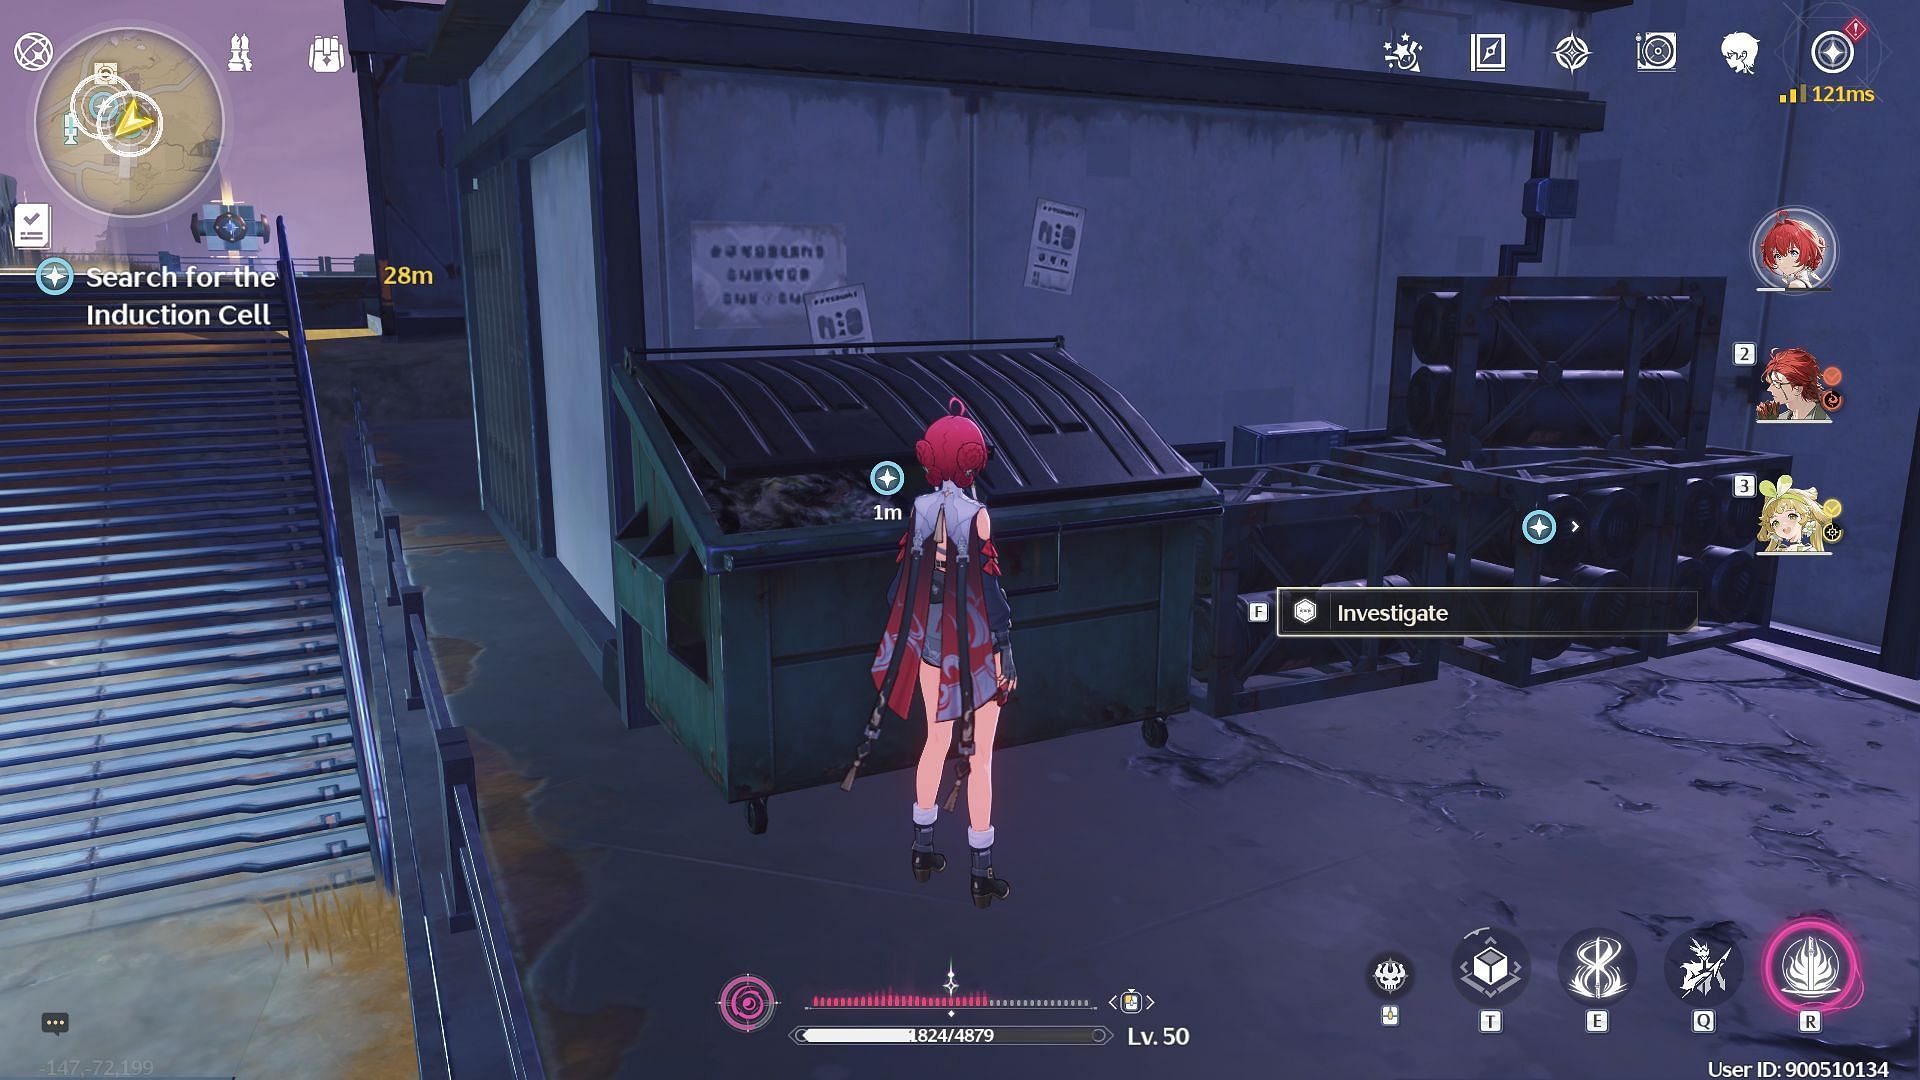 Investigate the dumpsters to find the Induction Cell (Image via Kuro Games)